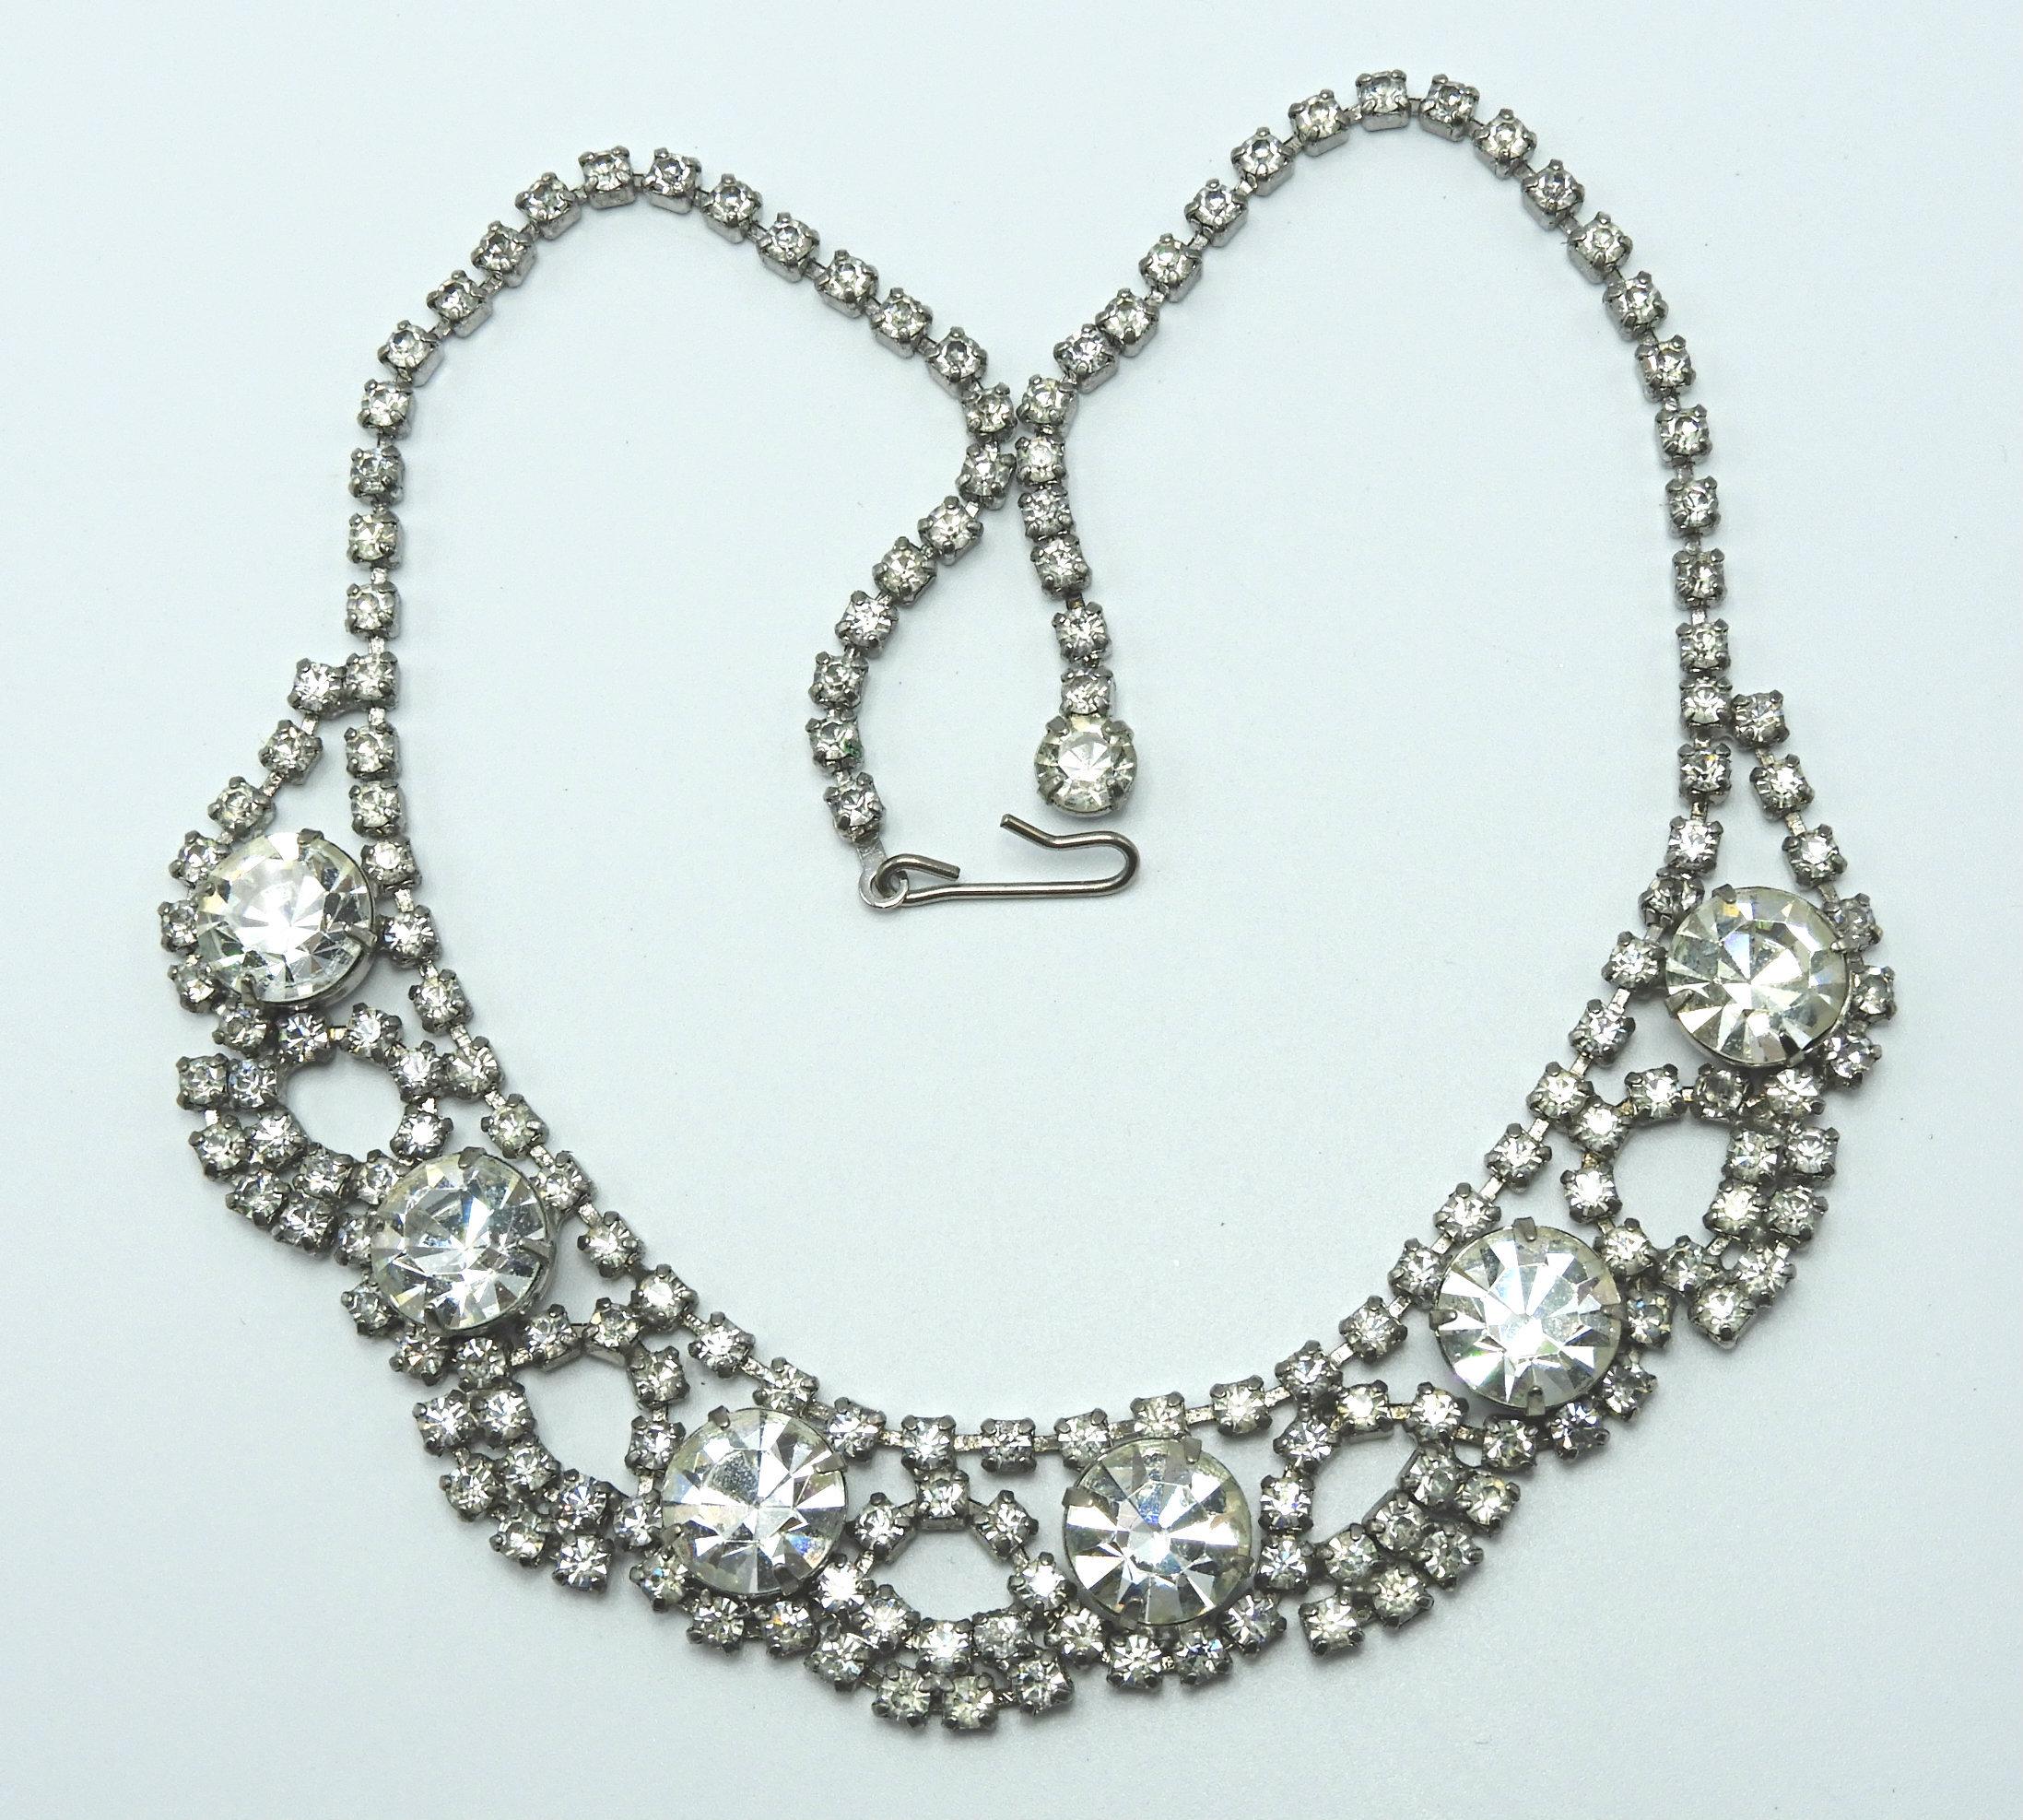 Vintage Crystal Rhinestone Necklace and Earring Set